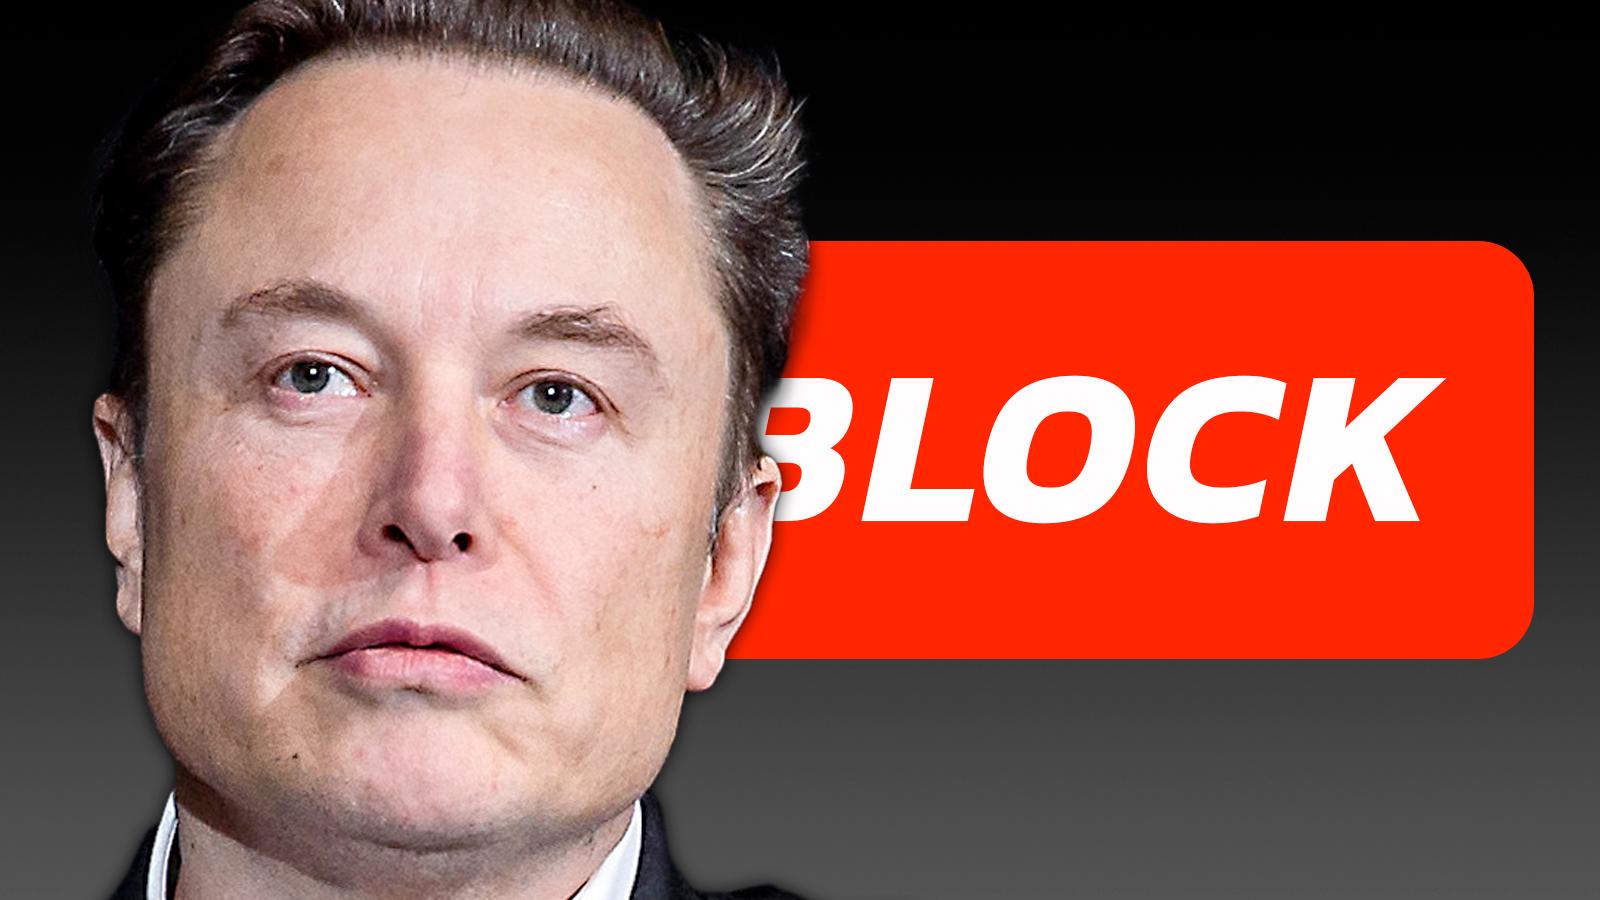 Elon Musk with a block button behind him representing X